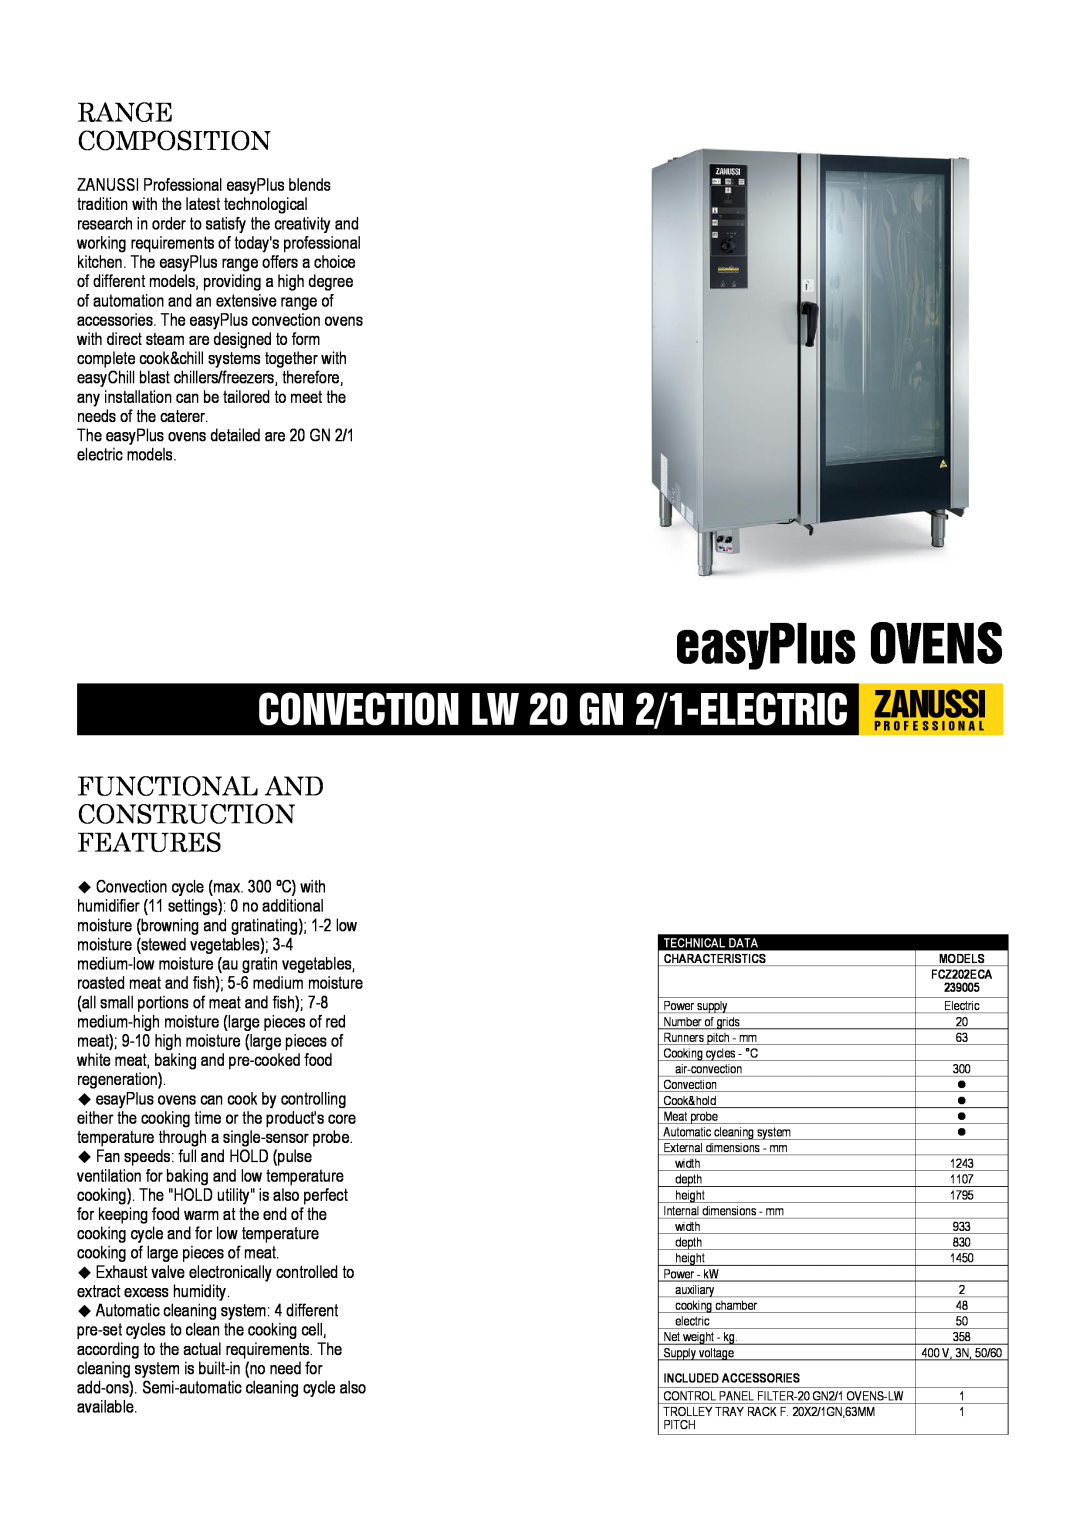 Zanussi FCZ202ECA, 239005 dimensions easyPlus OVENS, Range Composition, Functional And Construction Features 